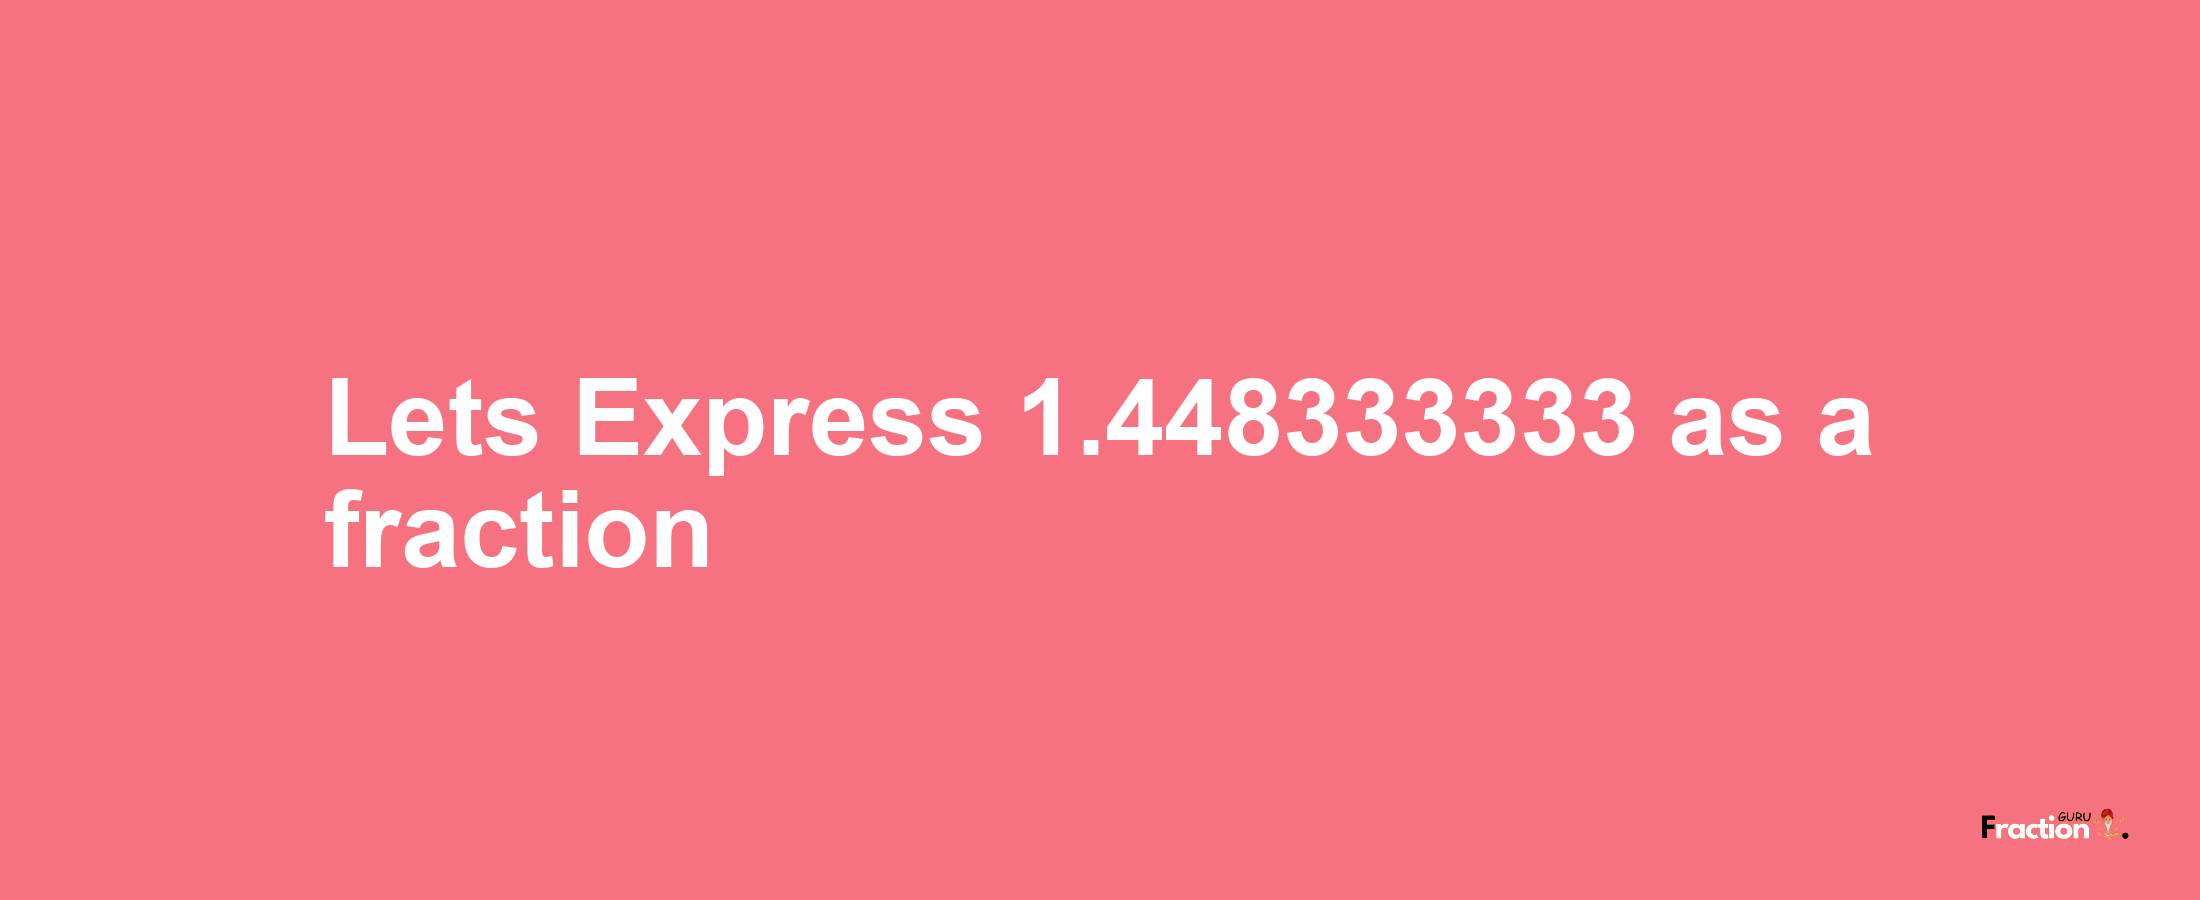 Lets Express 1.448333333 as afraction